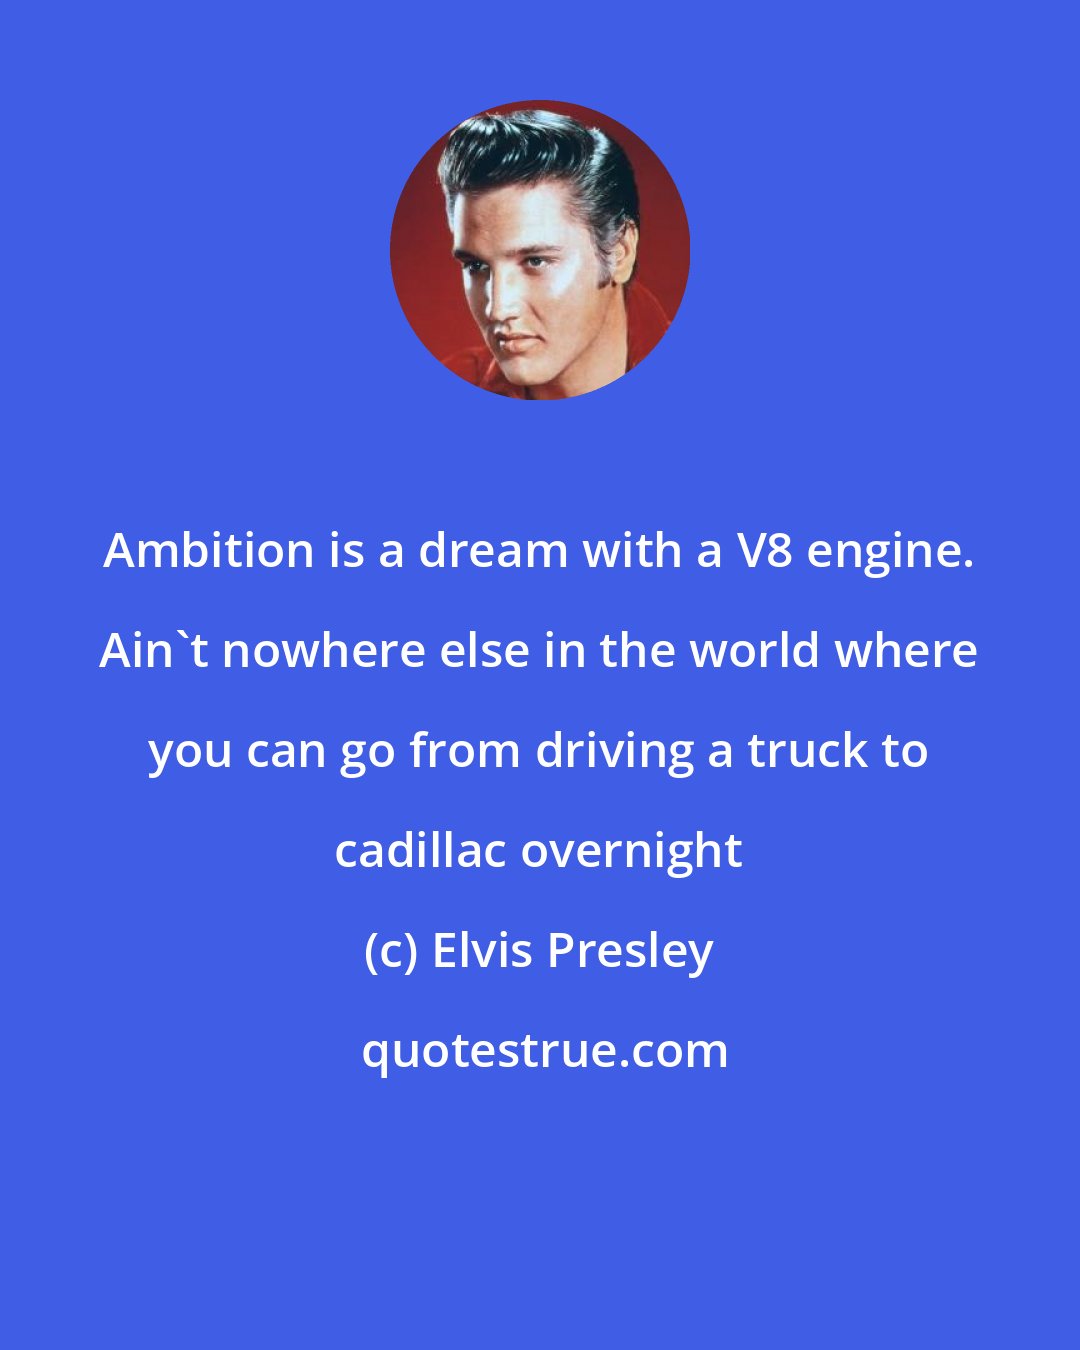 Elvis Presley: Ambition is a dream with a V8 engine. Ain't nowhere else in the world where you can go from driving a truck to cadillac overnight